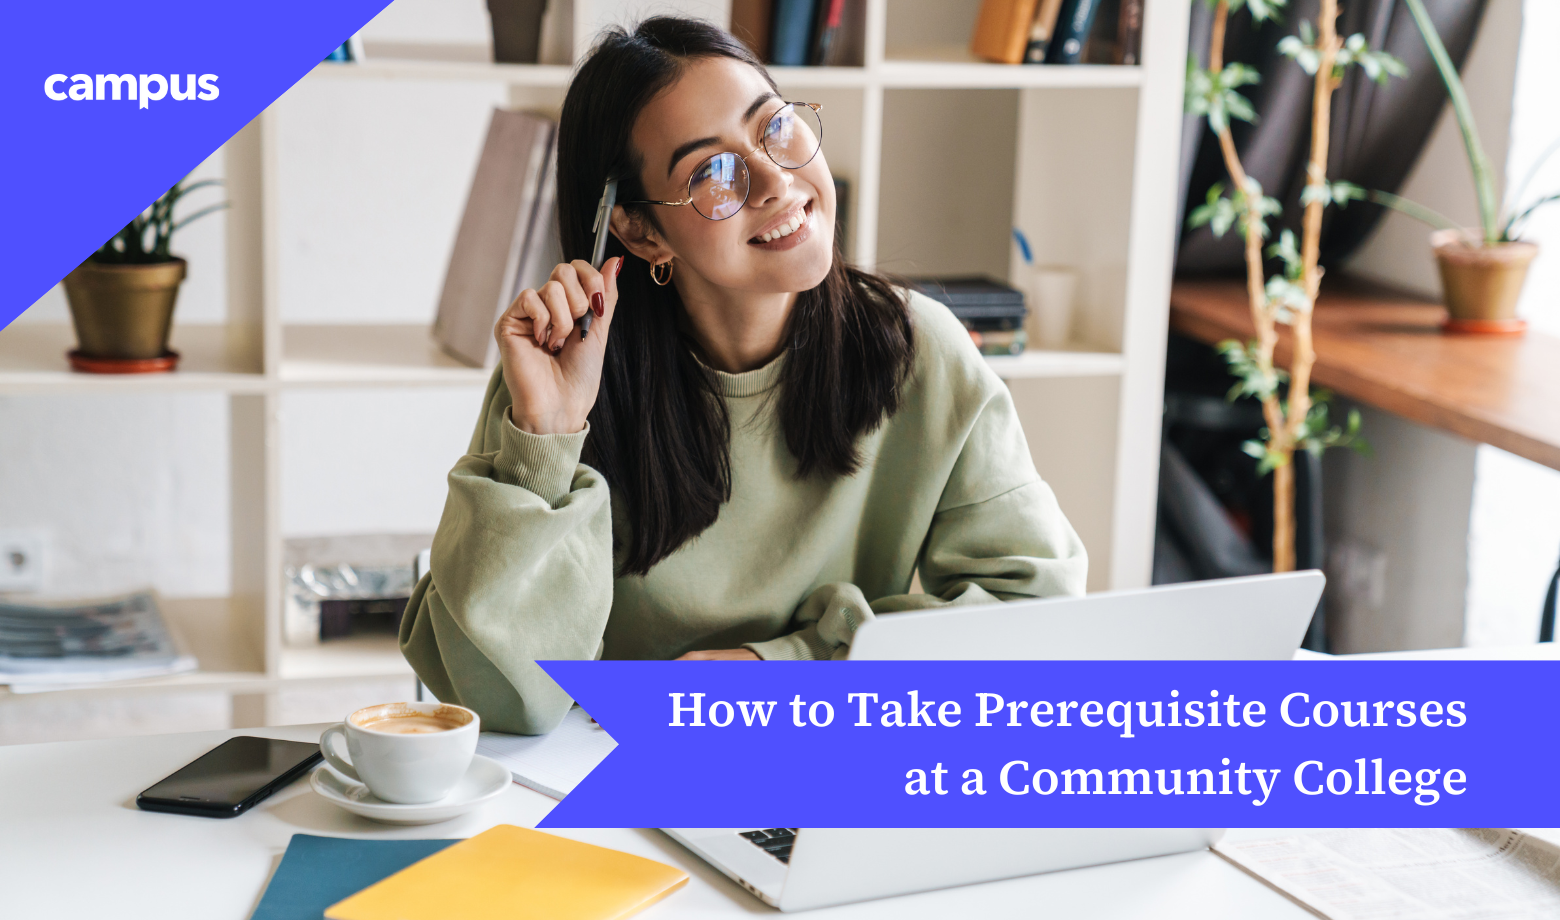 How to Take Prerequisite Courses at a Community College